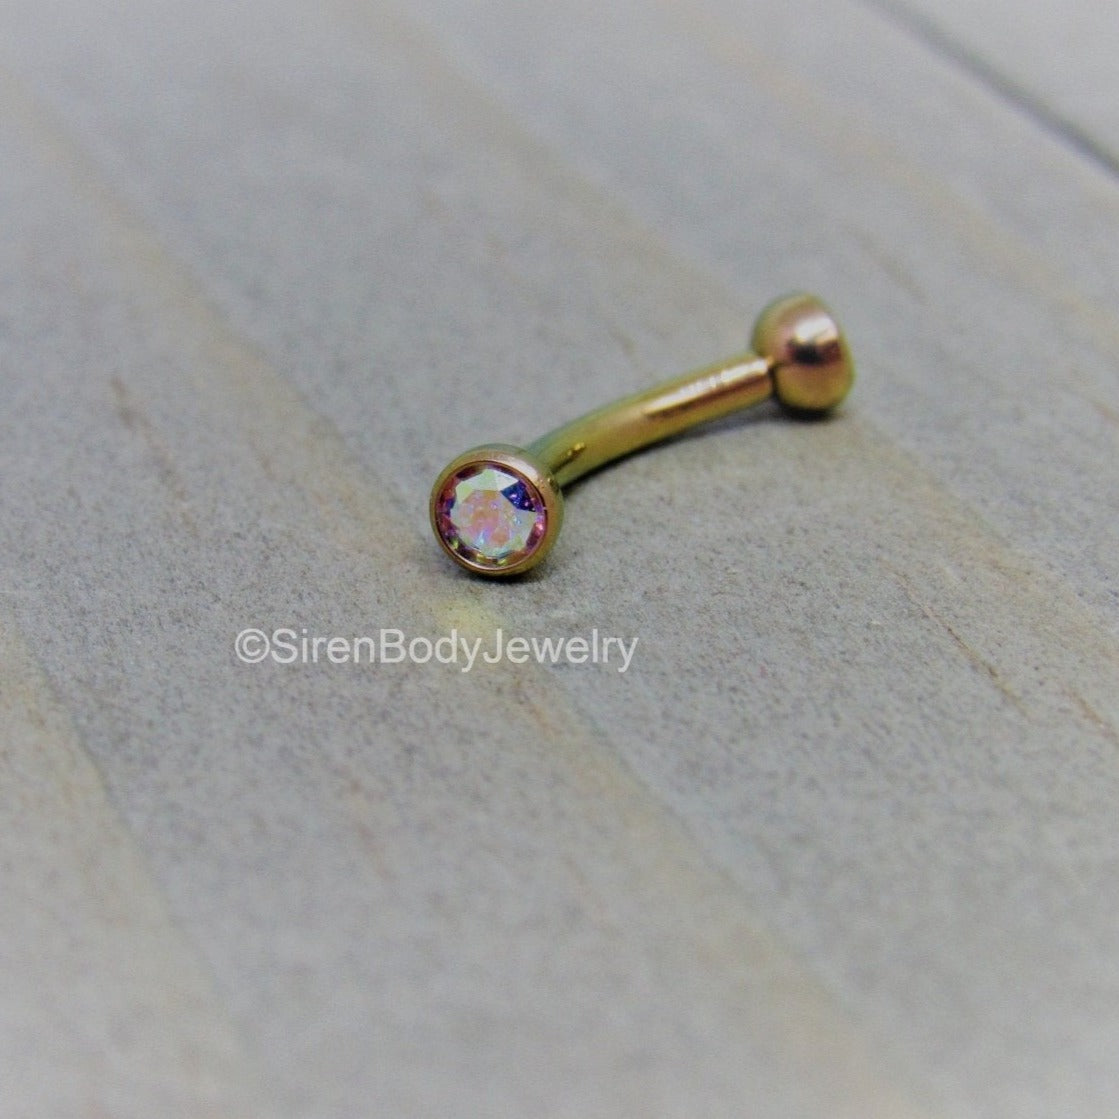 Rook piercing curved barbell 16g 5/16" pick your color titanium daith earring vertical labret barbell - SirenBodyJewelry